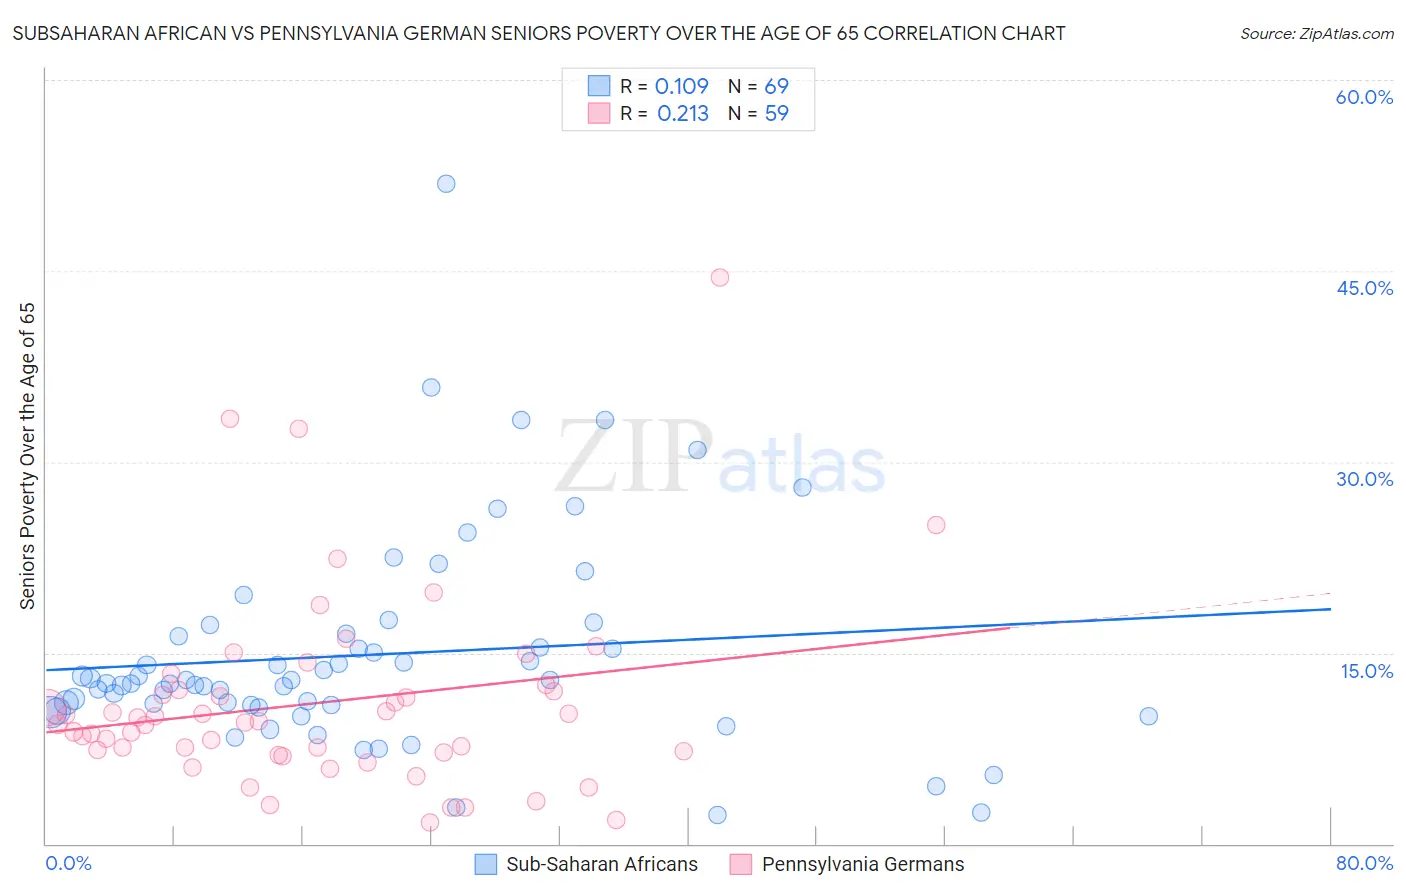 Subsaharan African vs Pennsylvania German Seniors Poverty Over the Age of 65